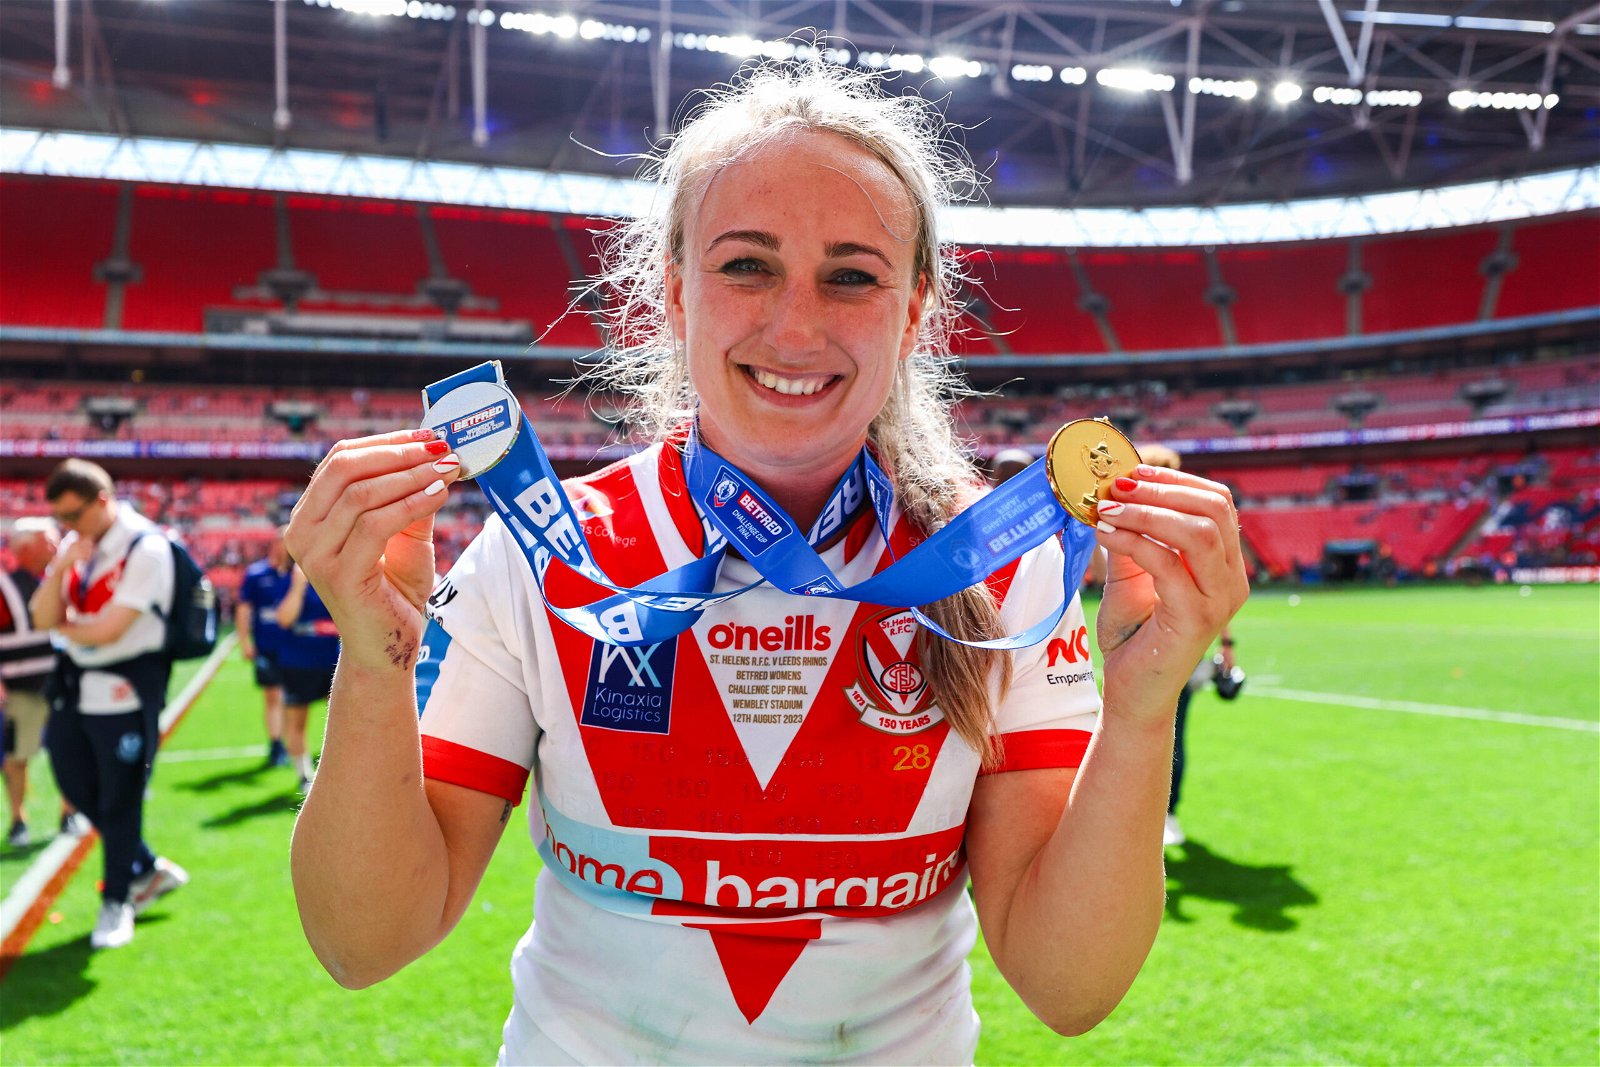 Jodie Cunningham of St Helens celebrates winning the Challenge Cup at Wembley, holding her medal to the camera.